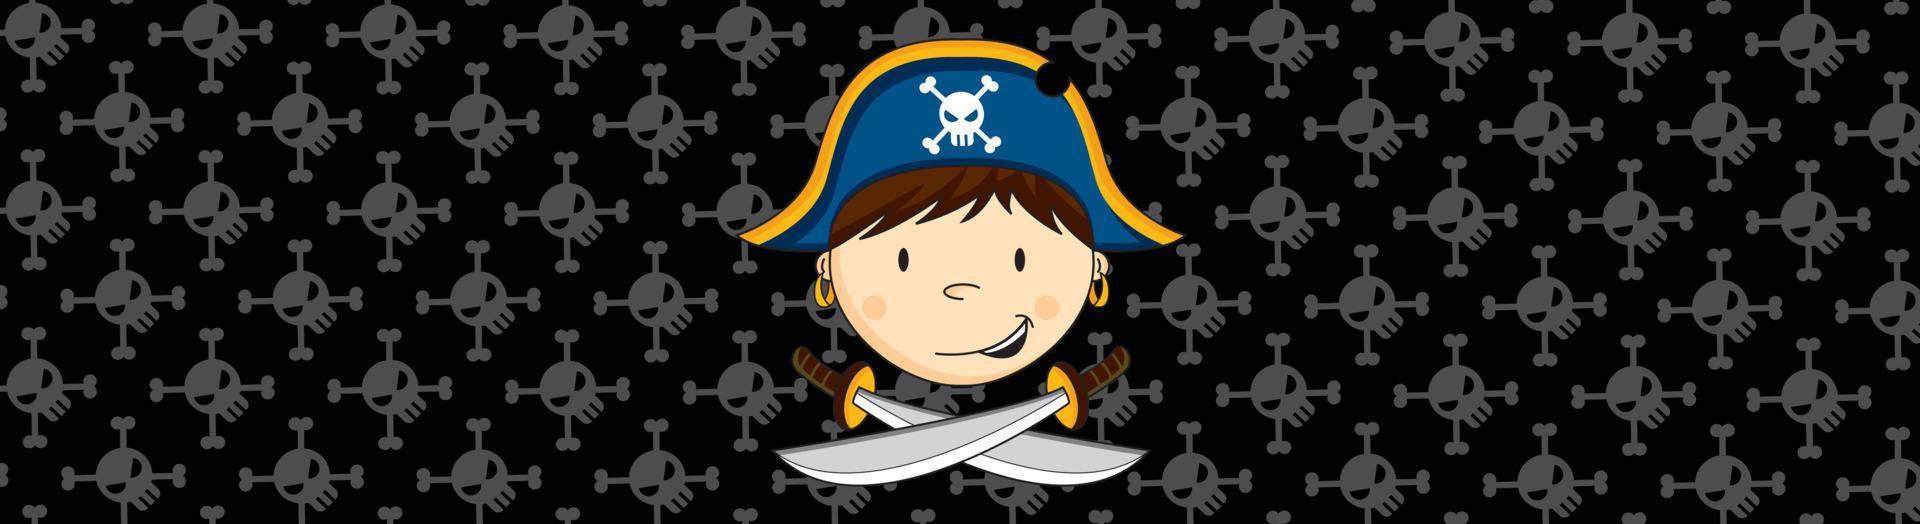 Cartoon Swashbuckling Pirate Captain with Crossed Swords Banner vector